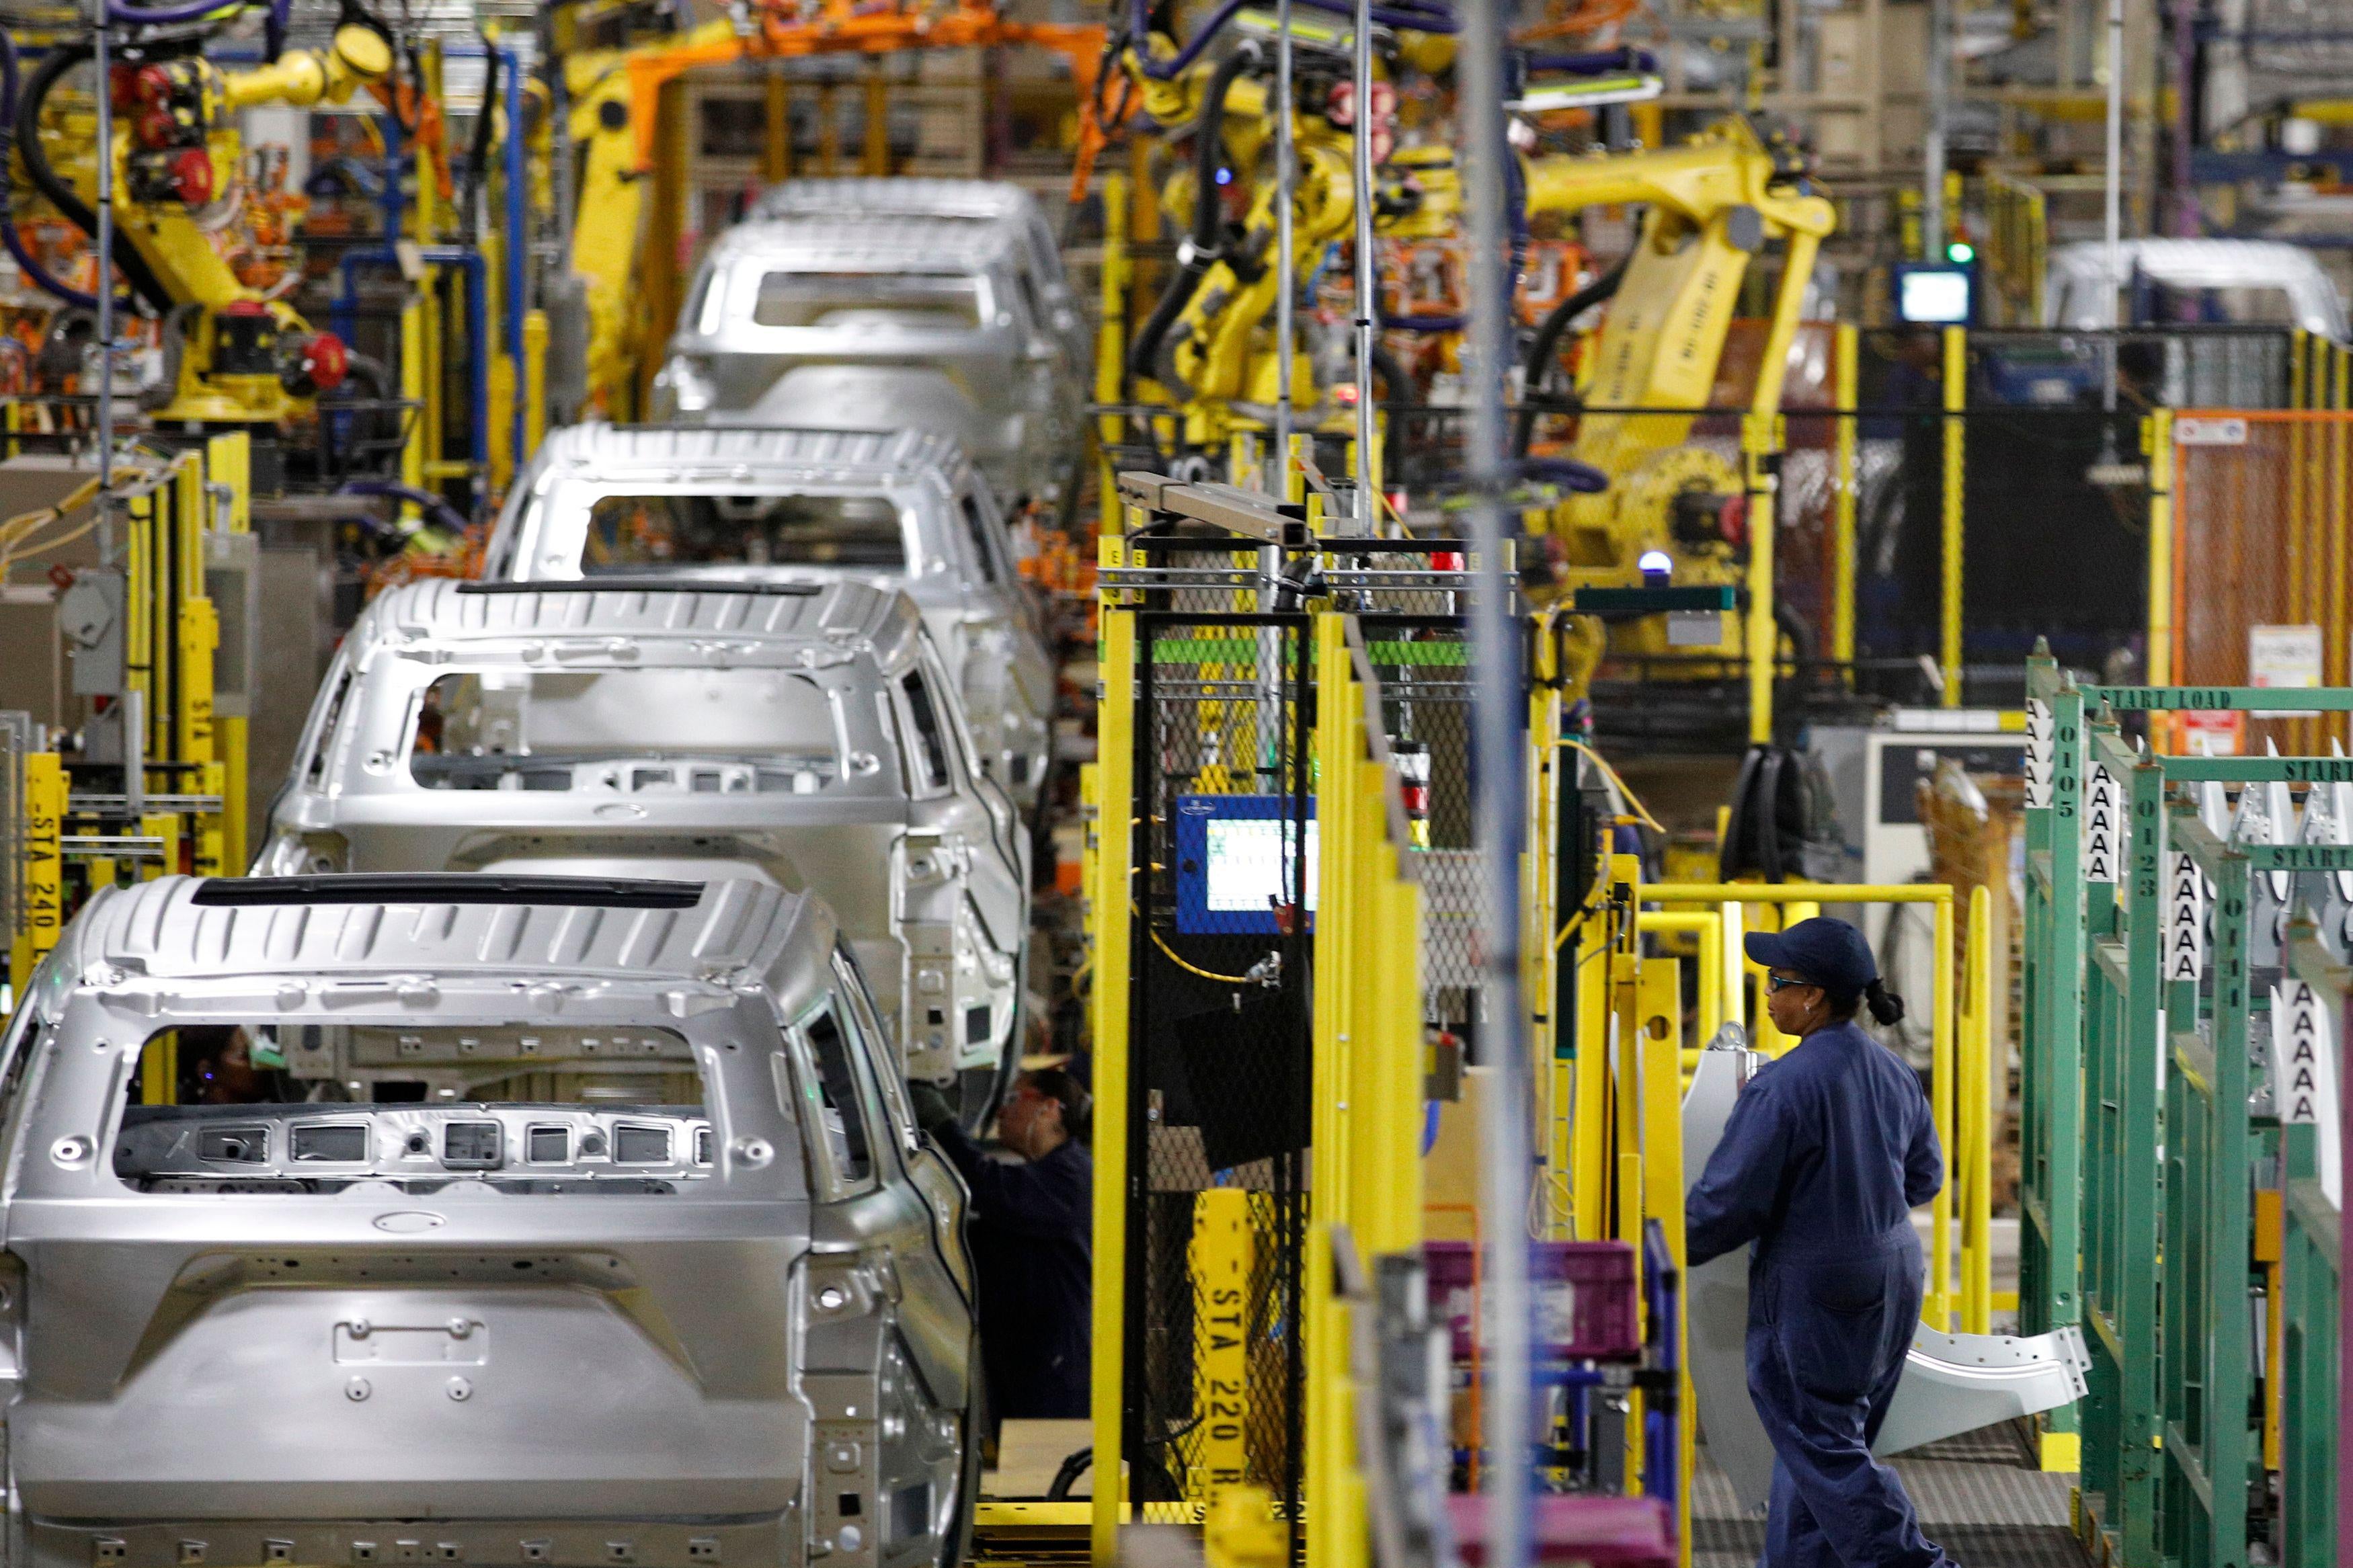 Unfinished cars are lined up on an assembly line on the left. Machinery surrounds them. A woman in a blue uniform walks toward them on the right.